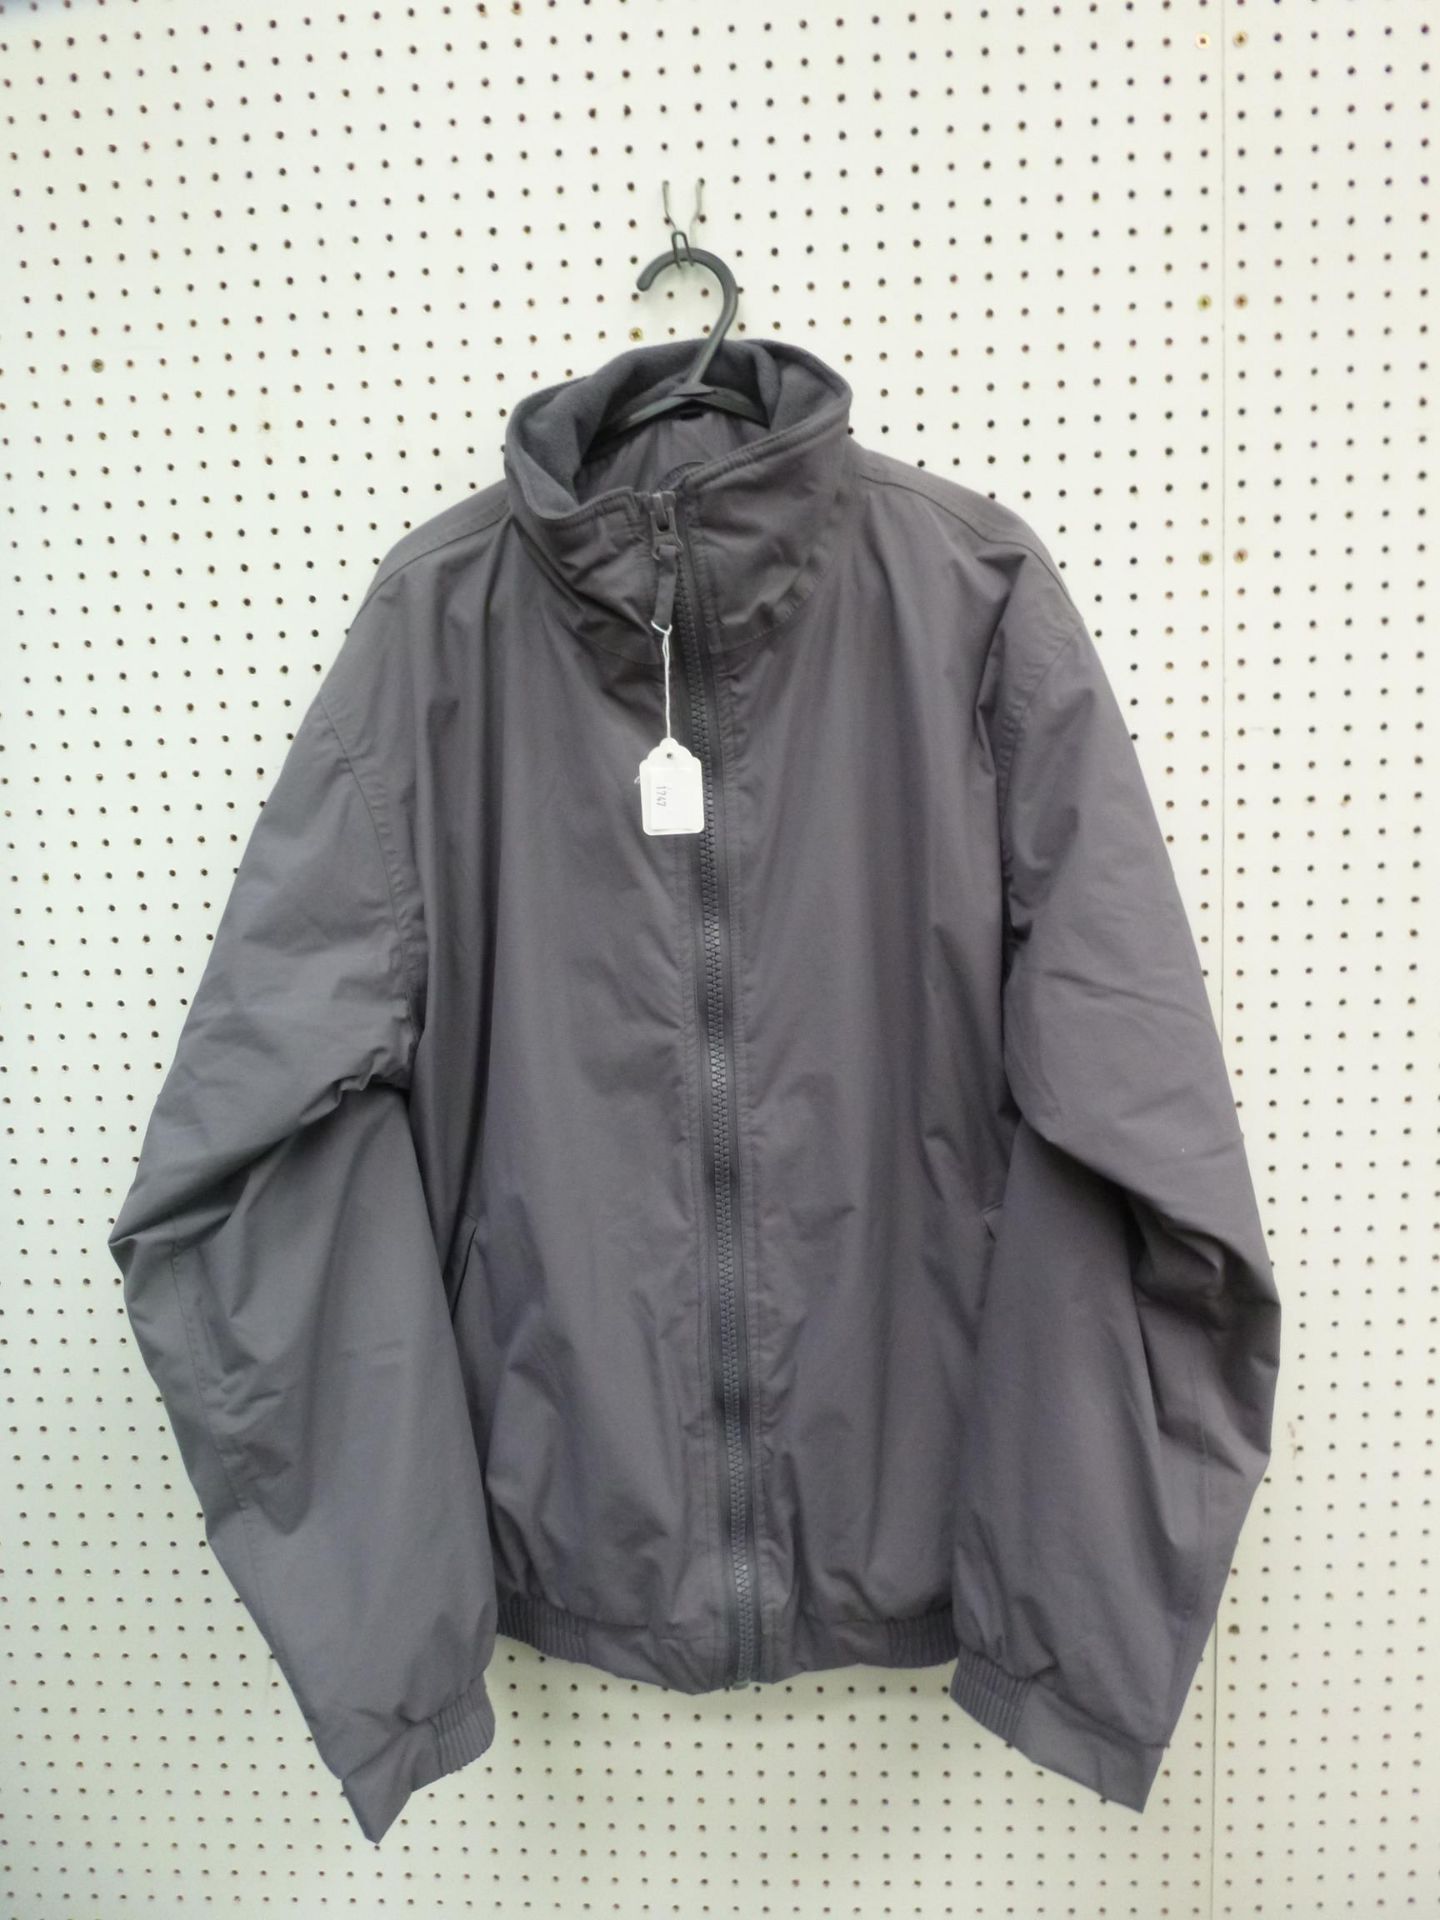 * Two New 'Bridleway' Waterproof Blouson Jackets in Grey, an X Small and XX Large. RRP £79.95 (2)